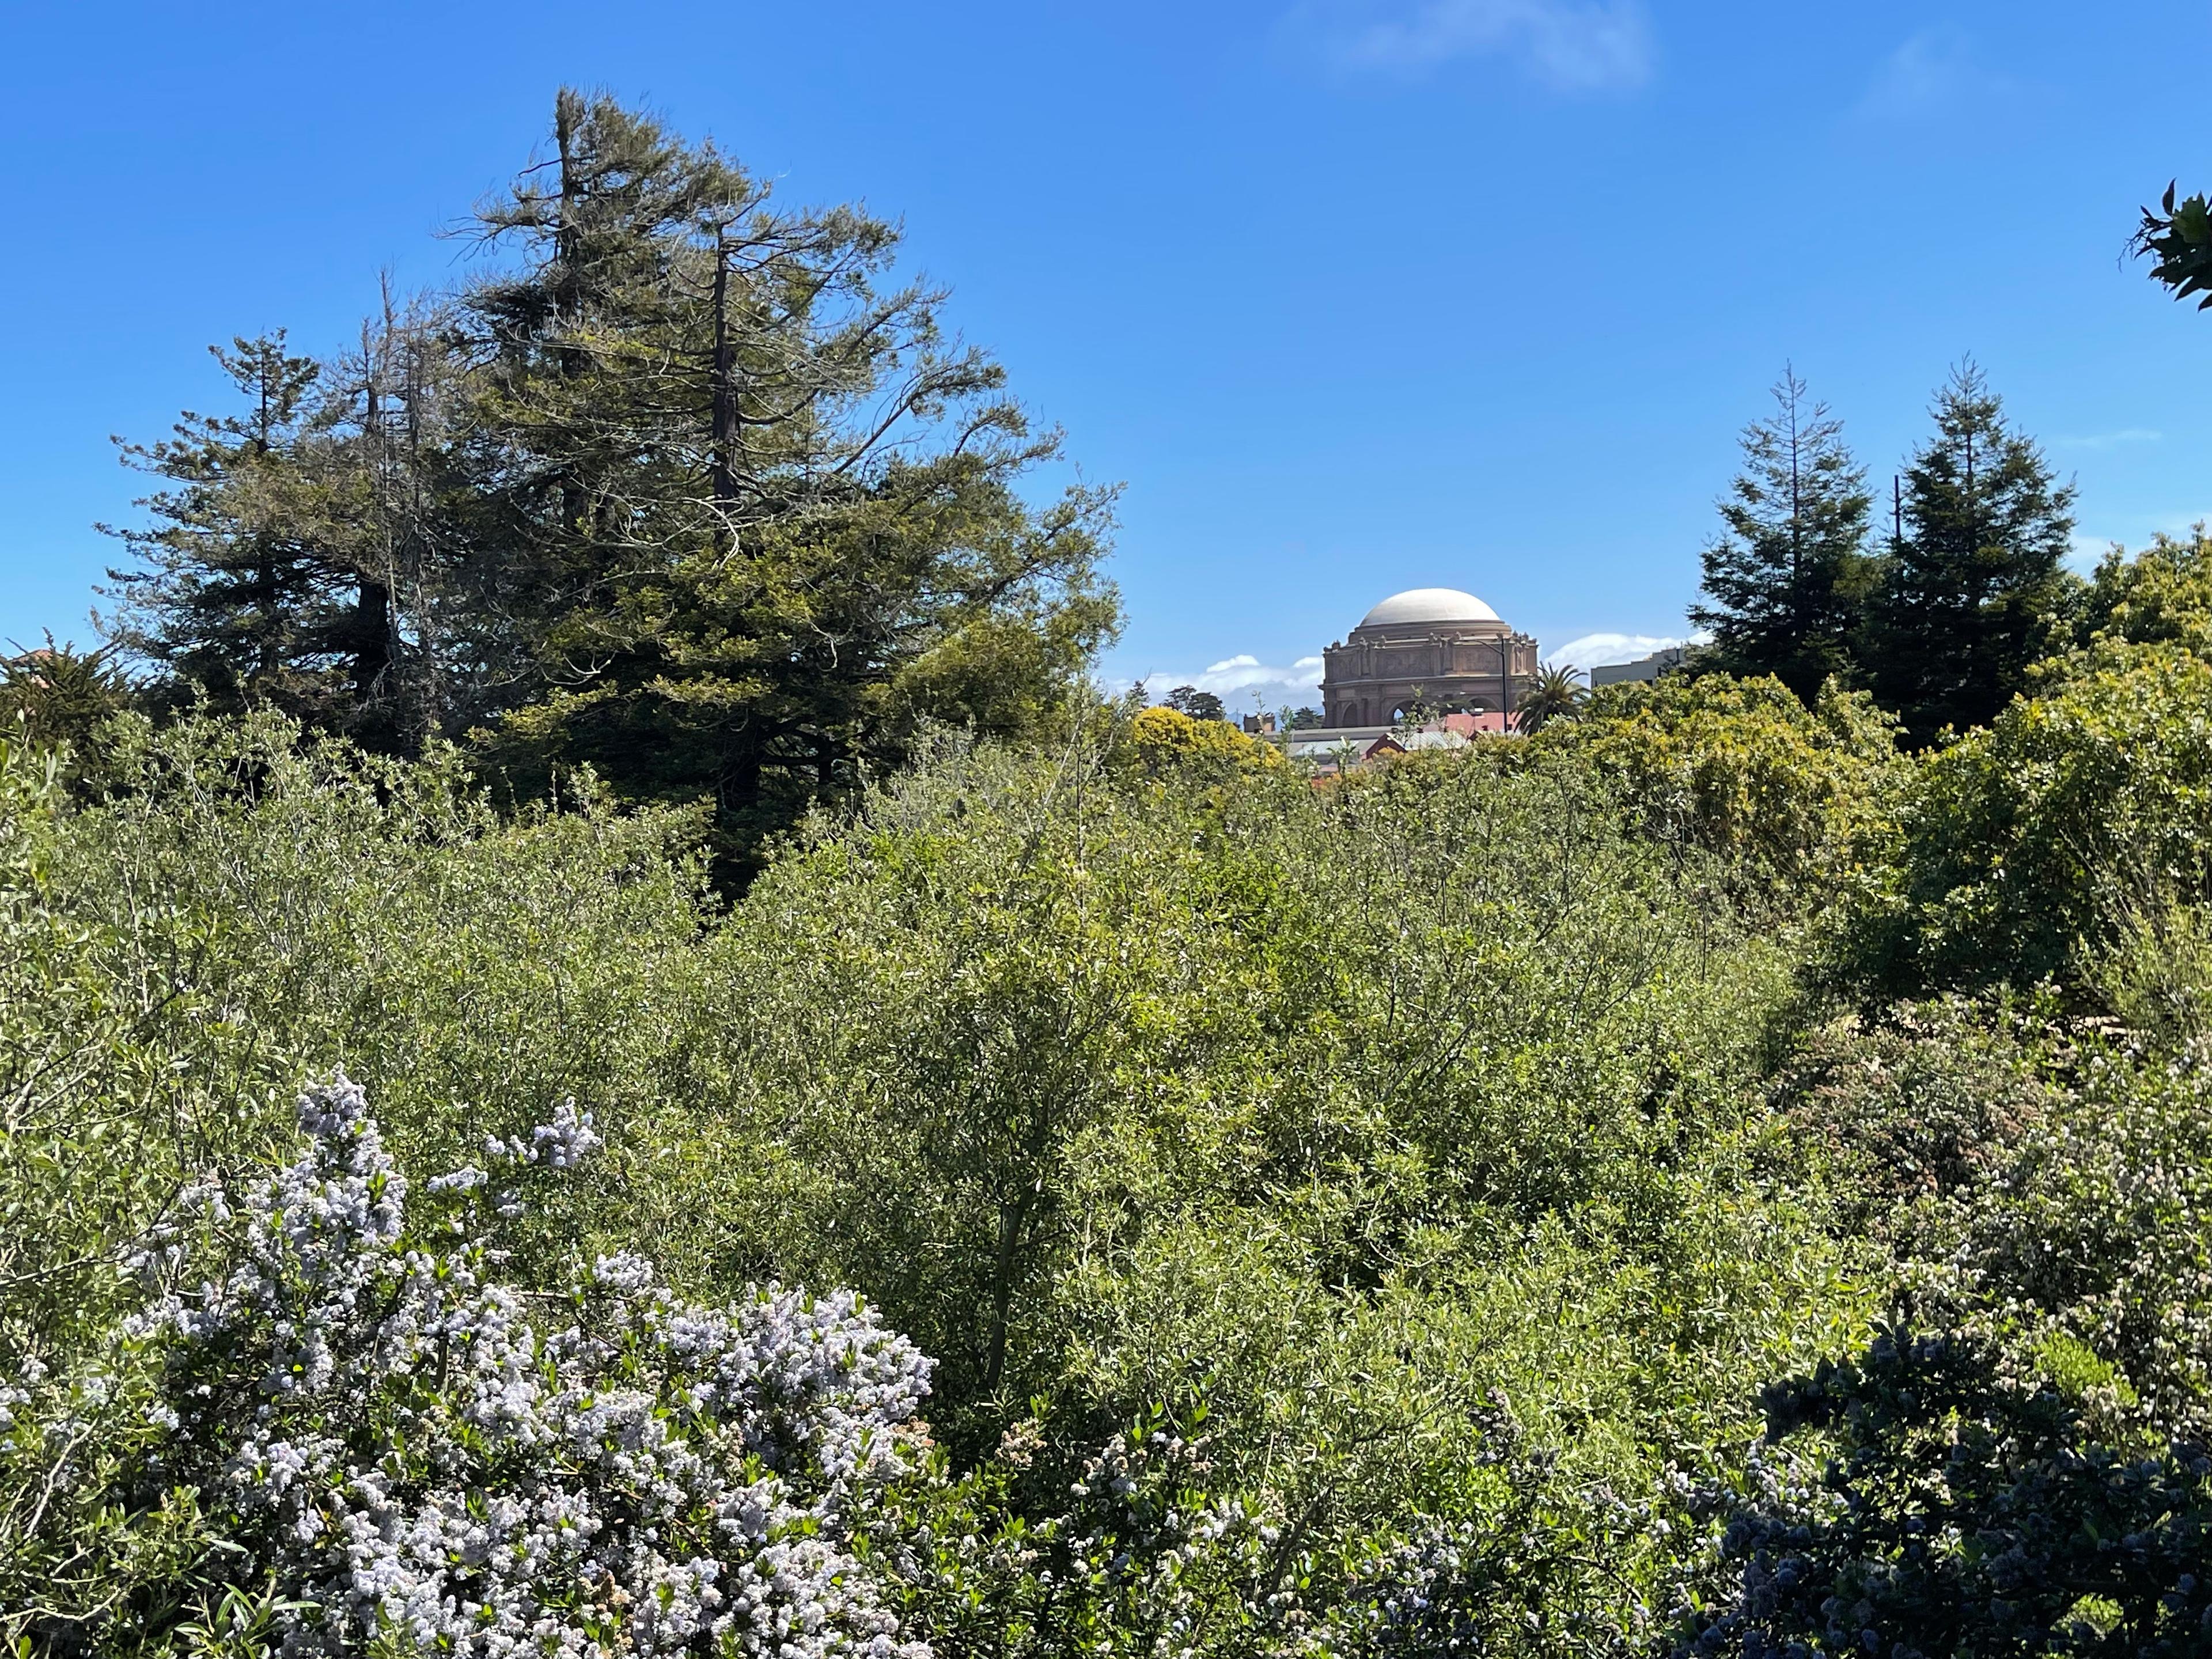 View of Palace of Fine Arts from Thompsons Reach with trees in the foreground.